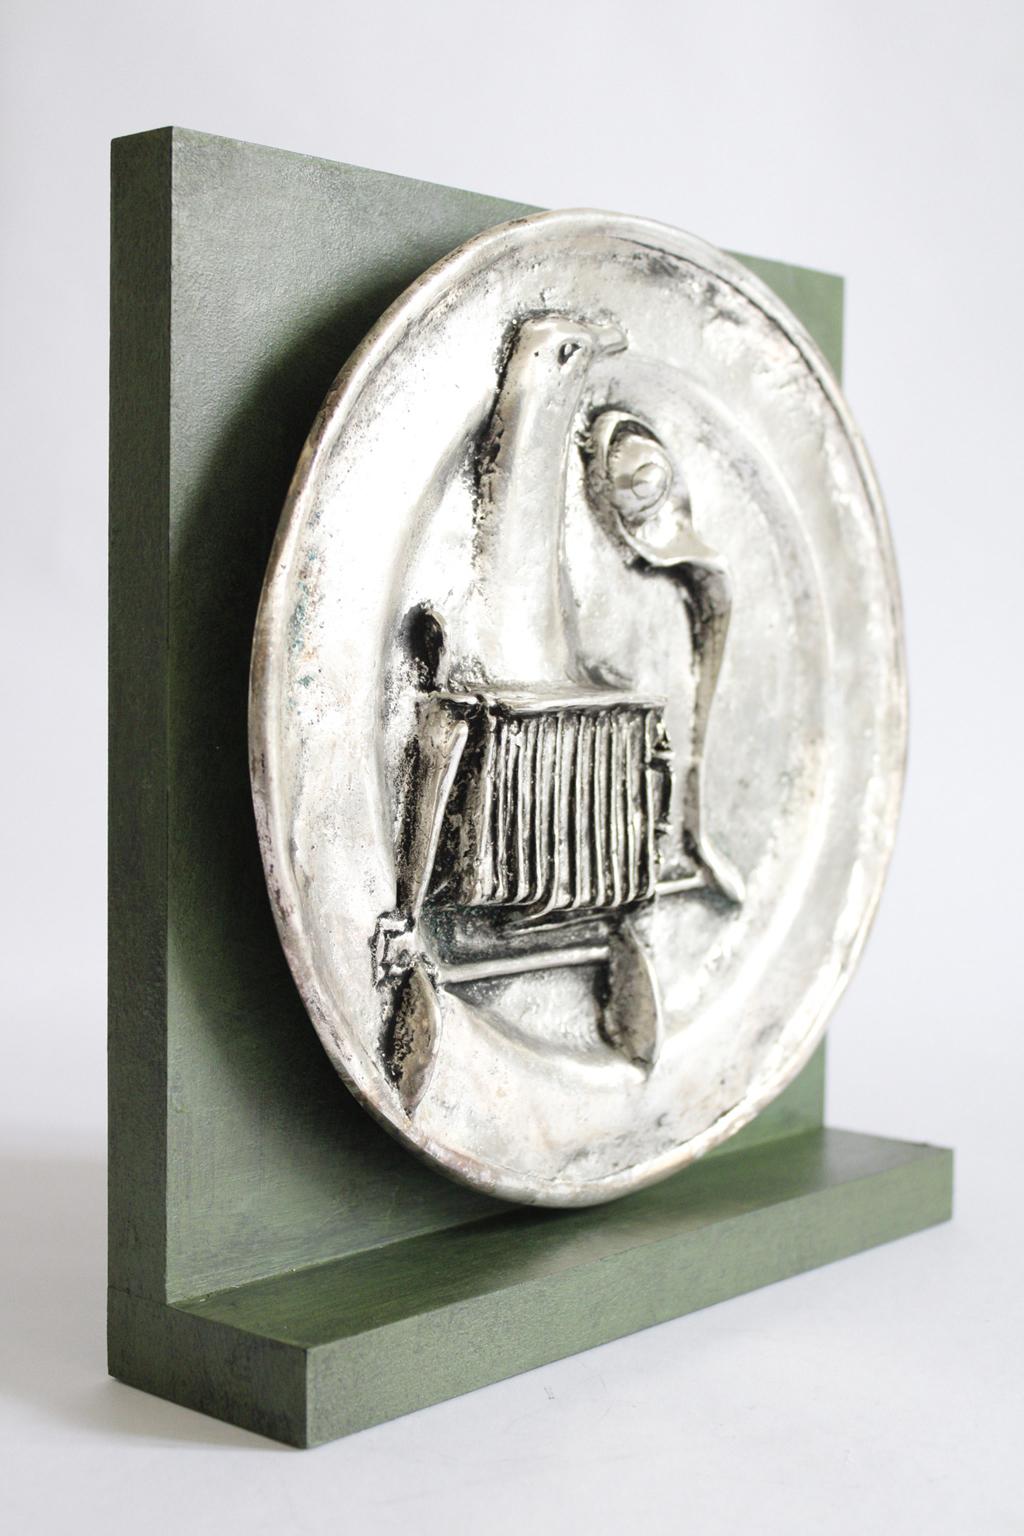 Appearances Italy 1980 Multiple Silver Plated Bronze on Painted Wood - Sculpture by Novello Finotti